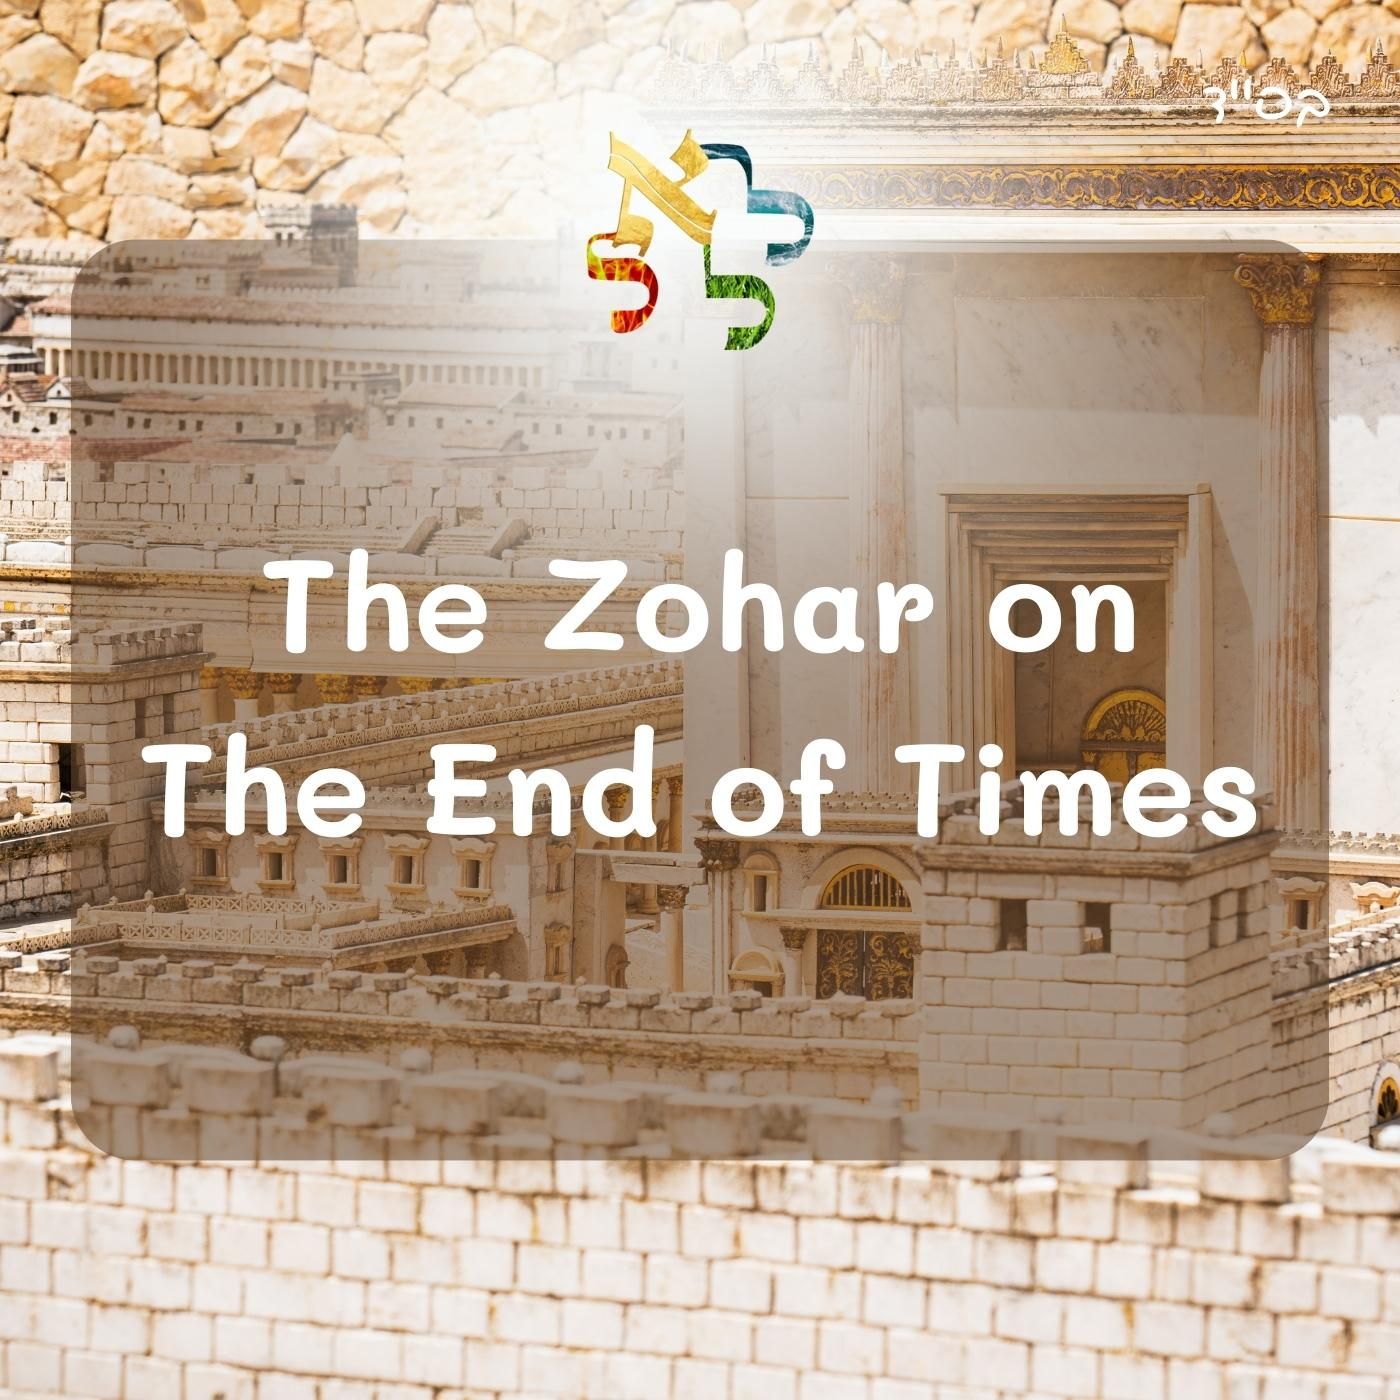 The Zohar on The End of Times